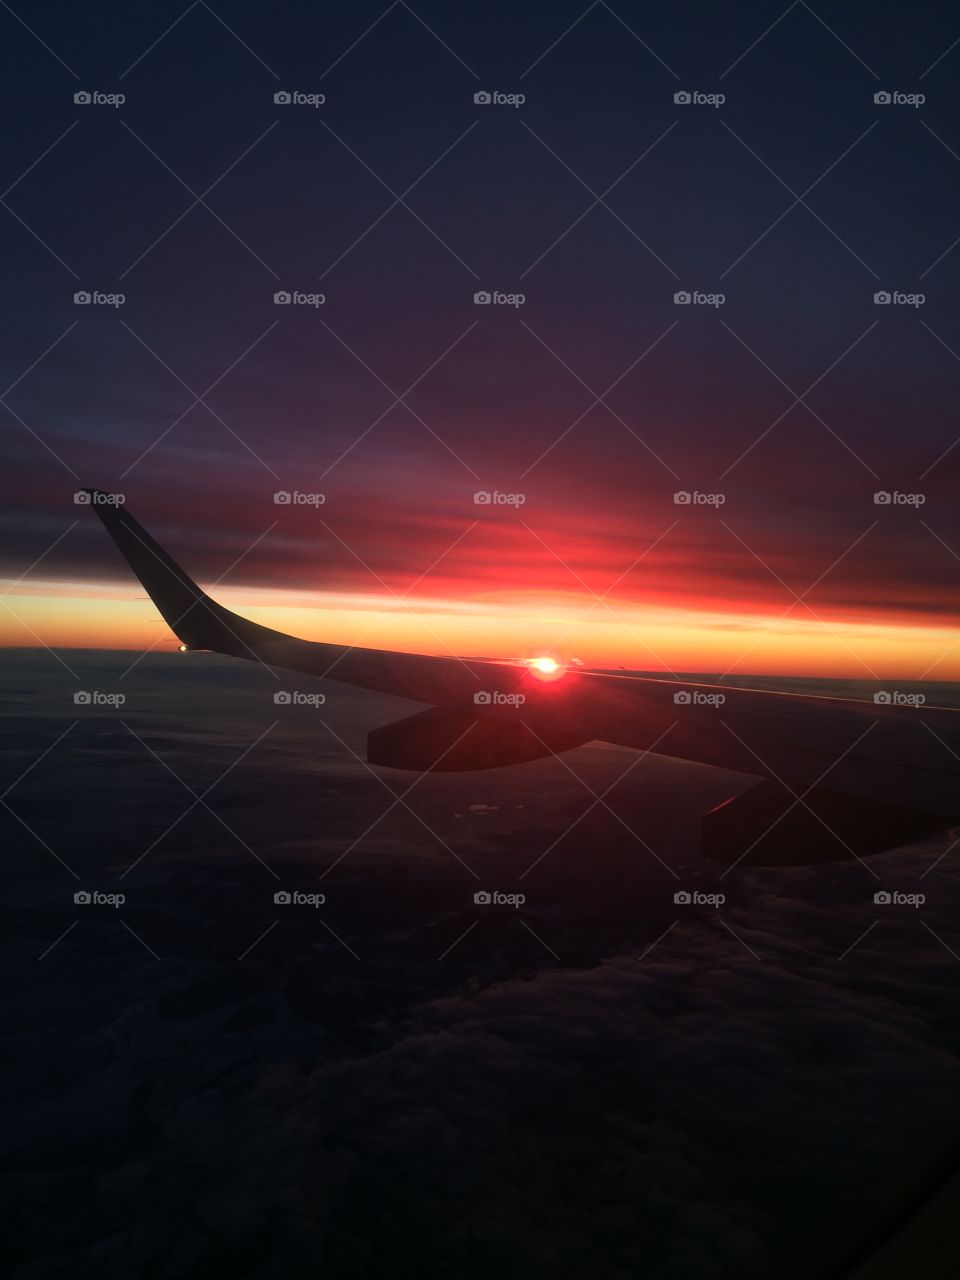 Sunset by plane ✈️ 